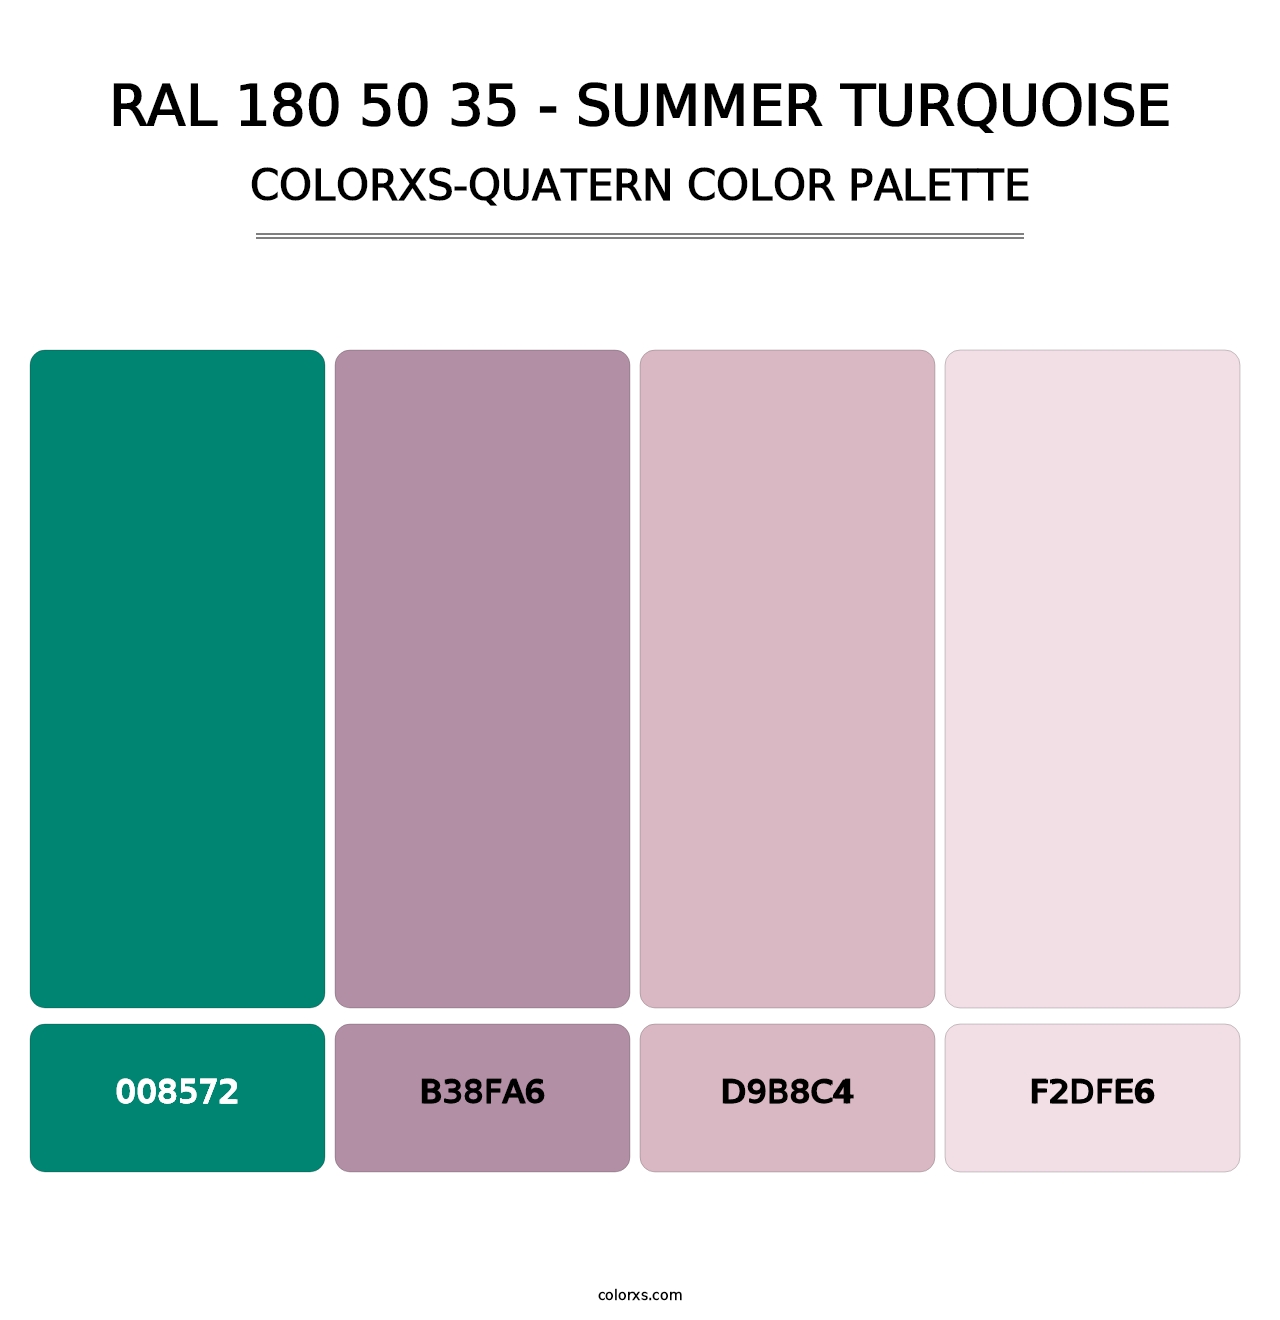 RAL 180 50 35 - Summer Turquoise - Colorxs Quatern Palette